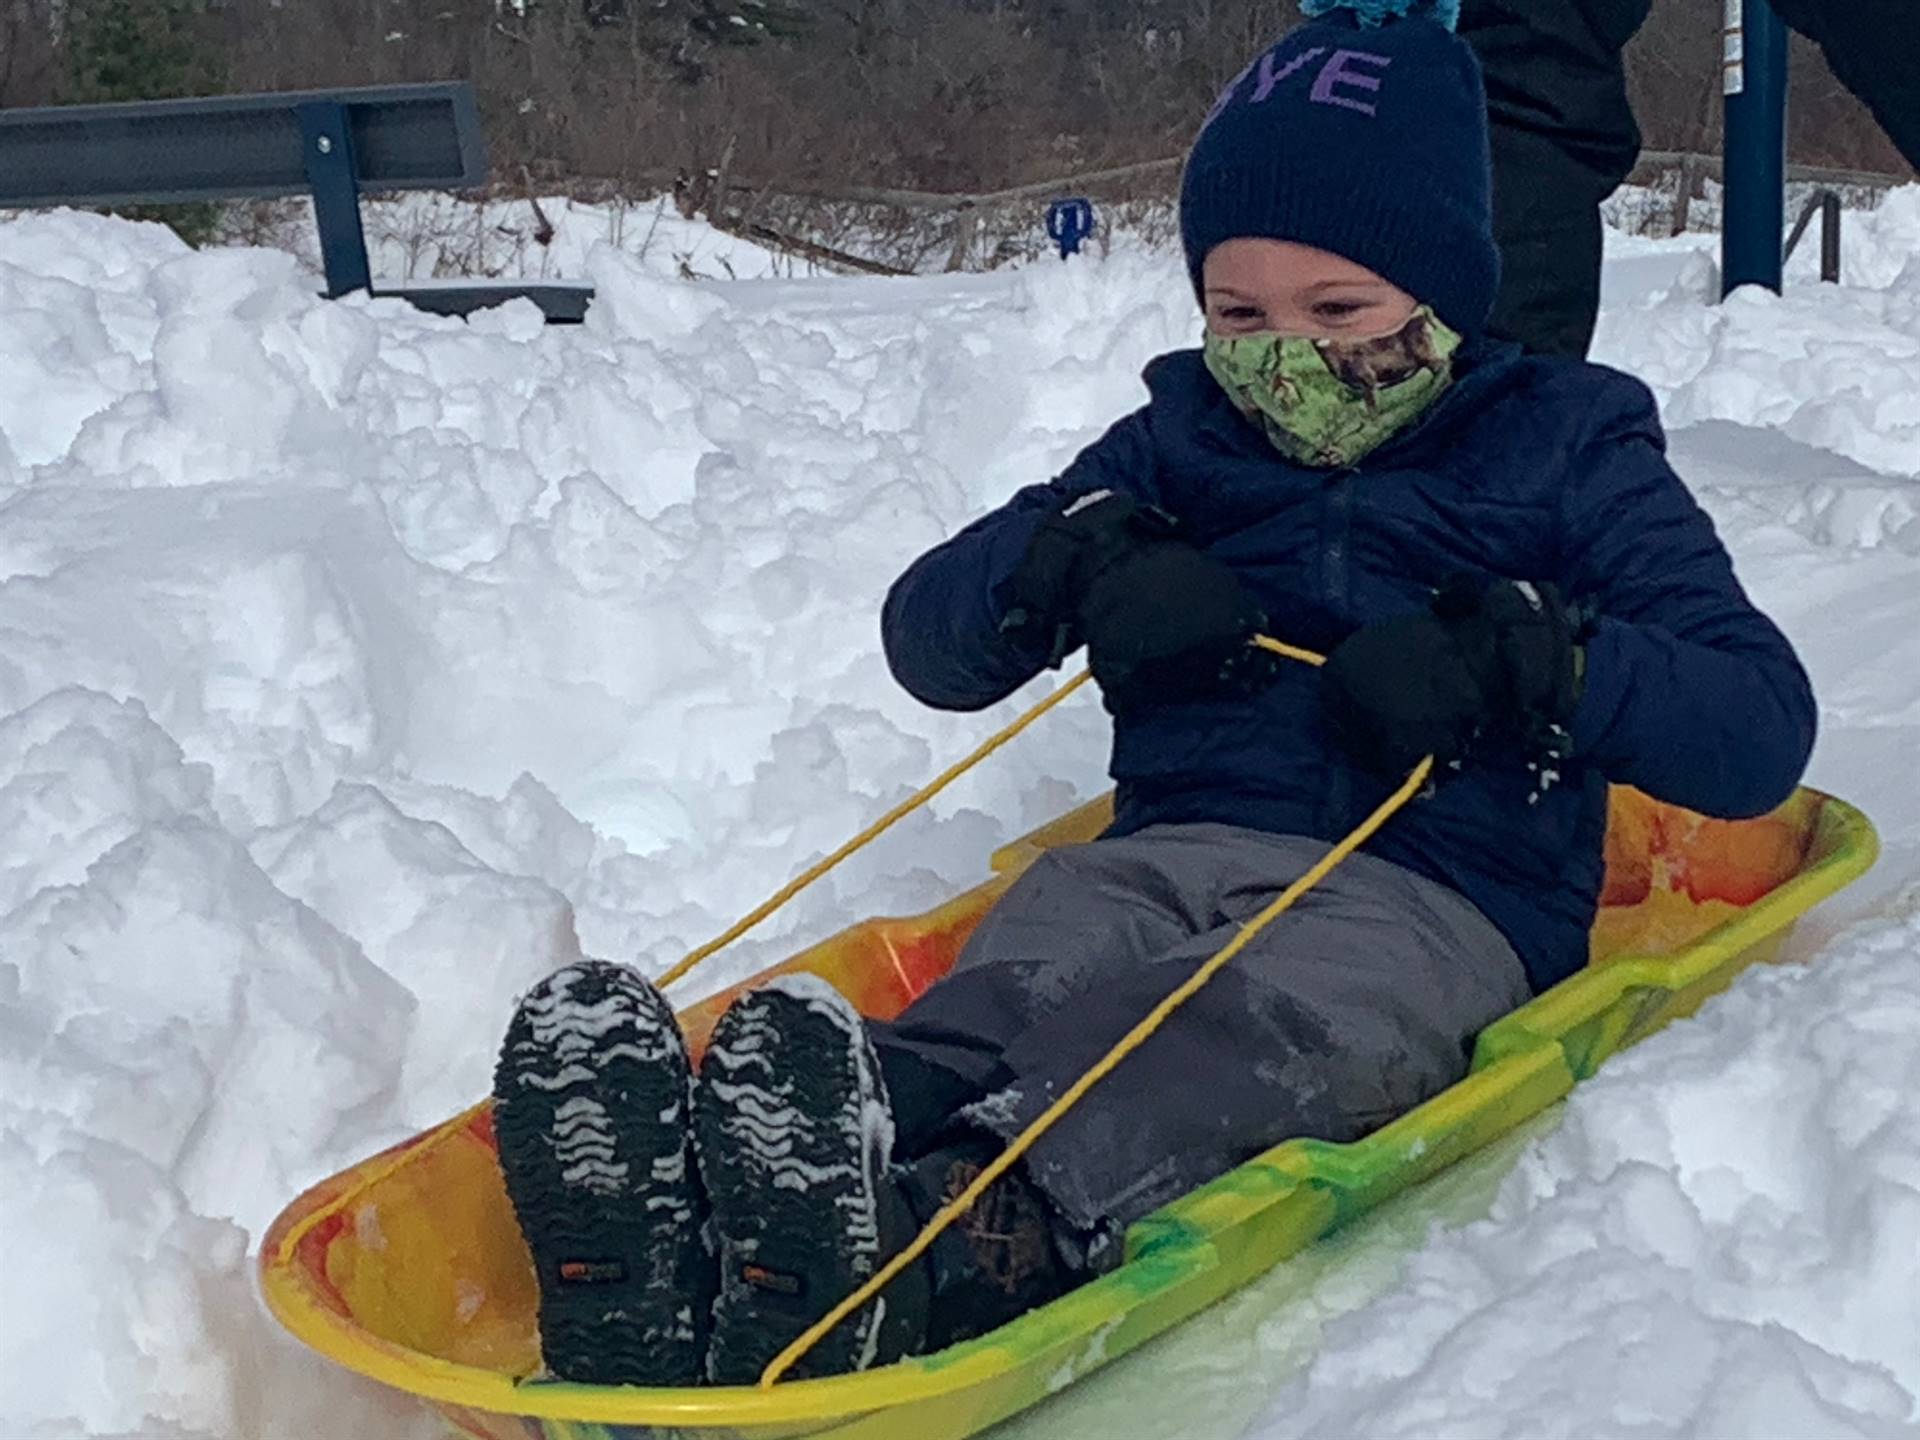 a student is Sledding.